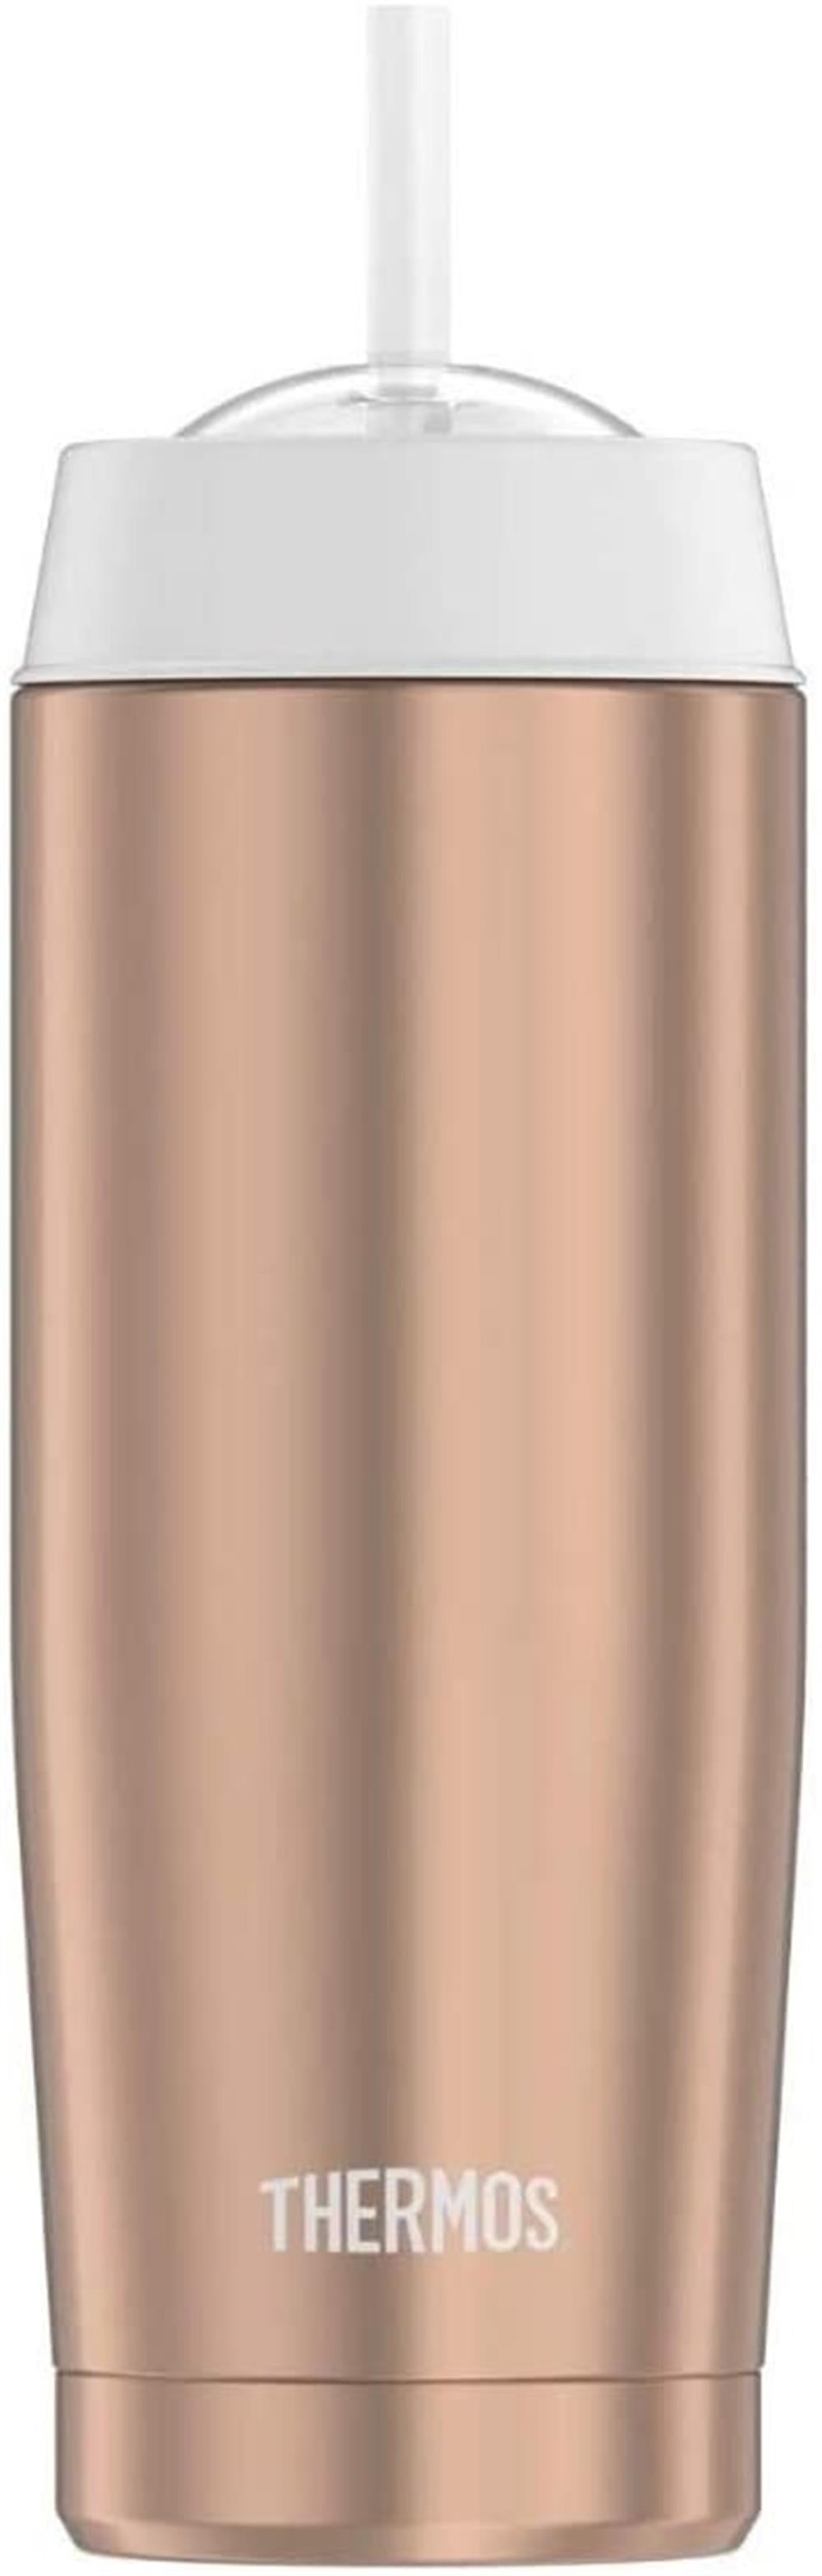 Thermos Cold Cup With Straw, 18 oz